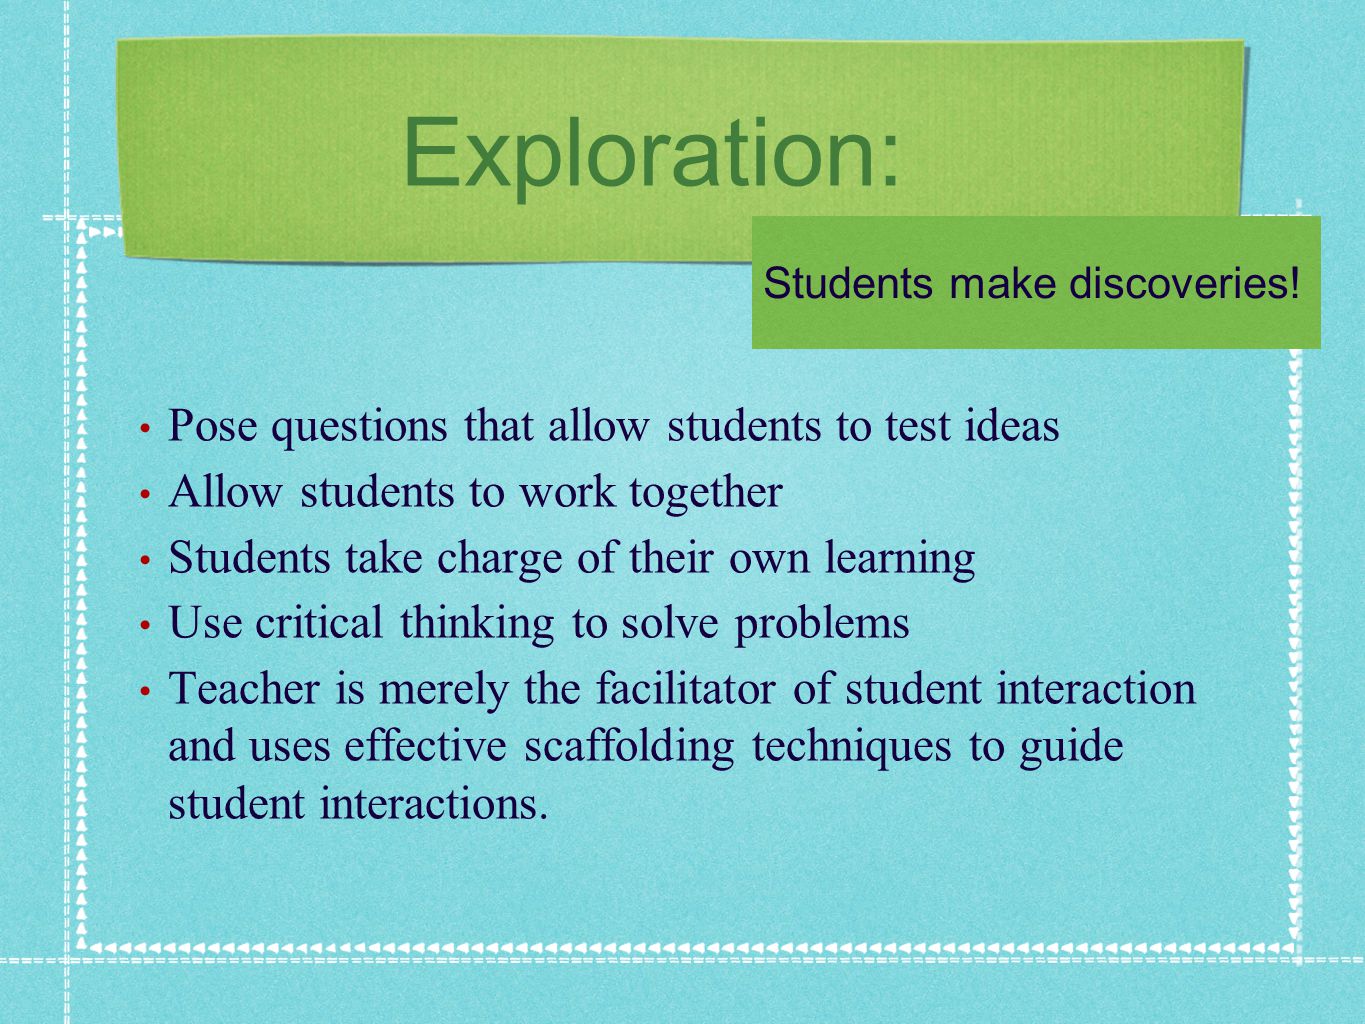 Exploration: Pose questions that allow students to test ideas Allow students to work together Students take charge of their own learning Use critical thinking to solve problems Teacher is merely the facilitator of student interaction and uses effective scaffolding techniques to guide student interactions.